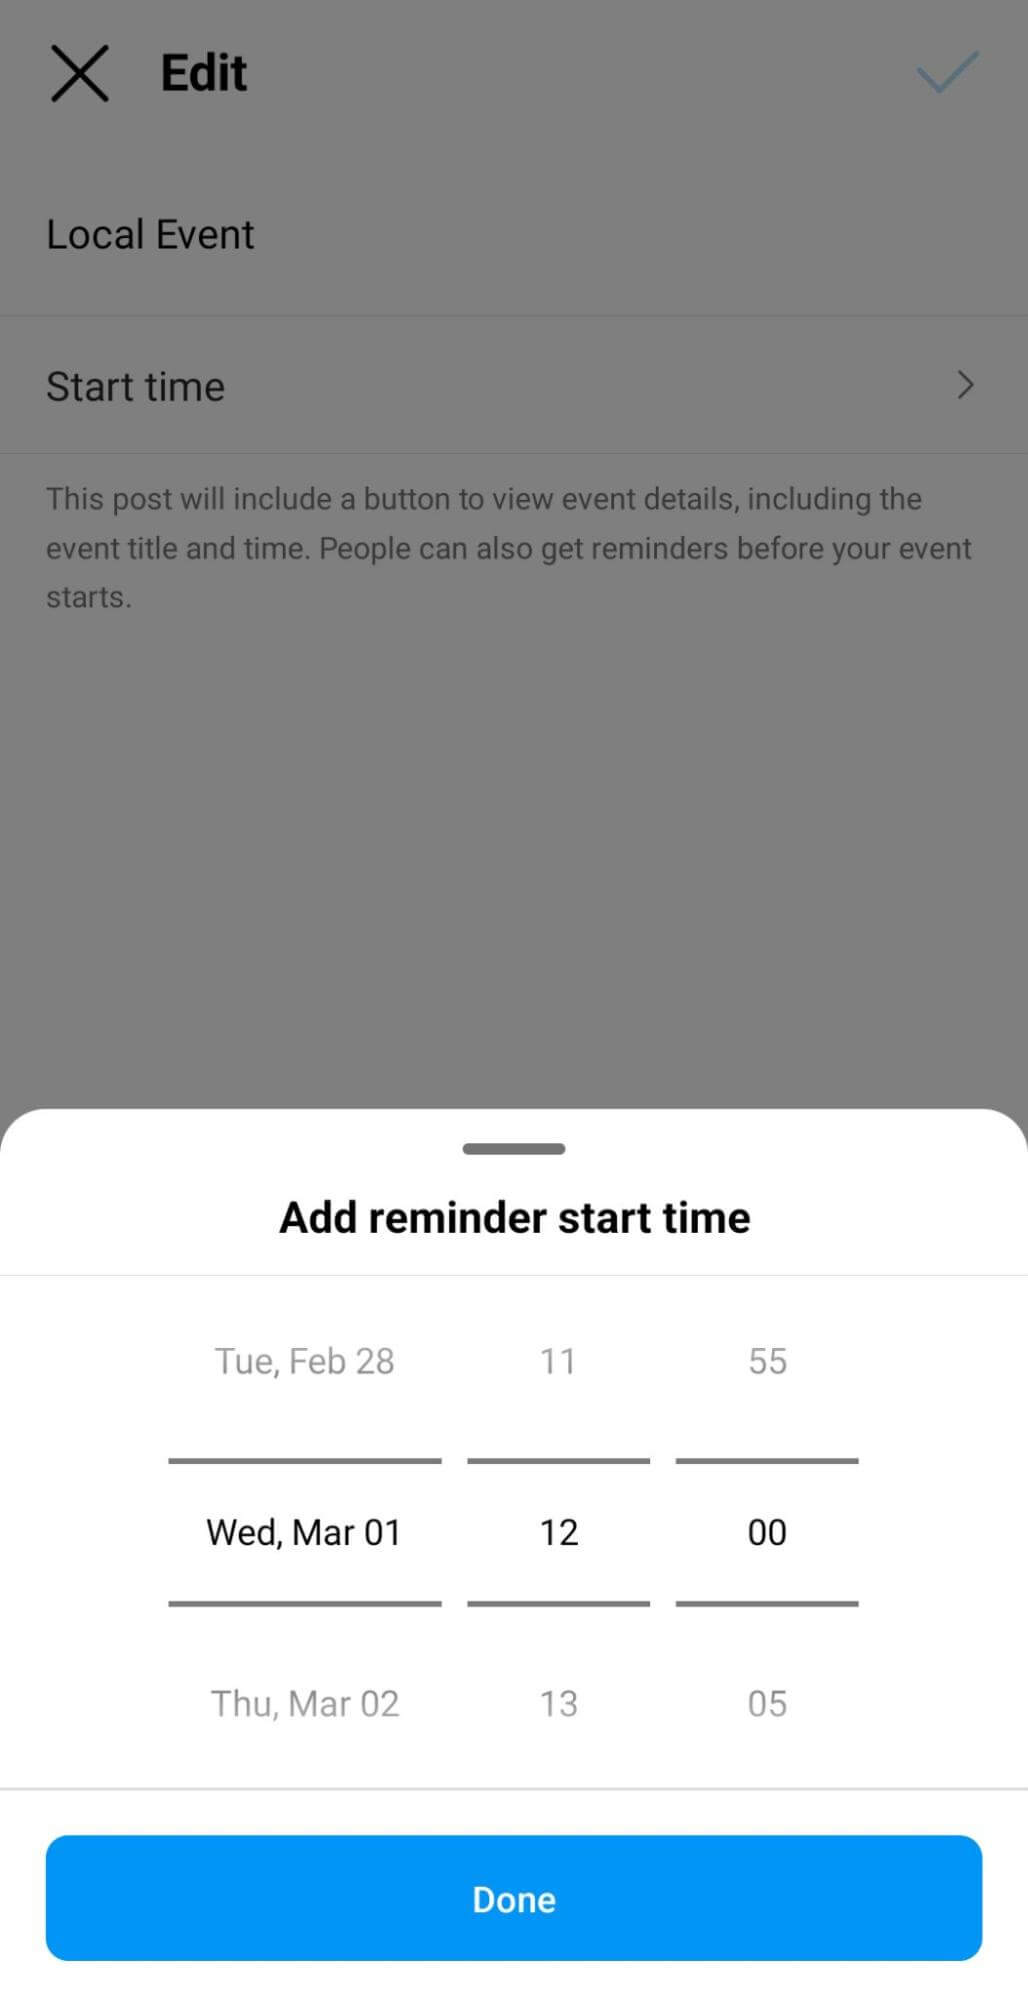 instagram-content-strategy-with-local-focus-create-reminders-for-instore-events-8